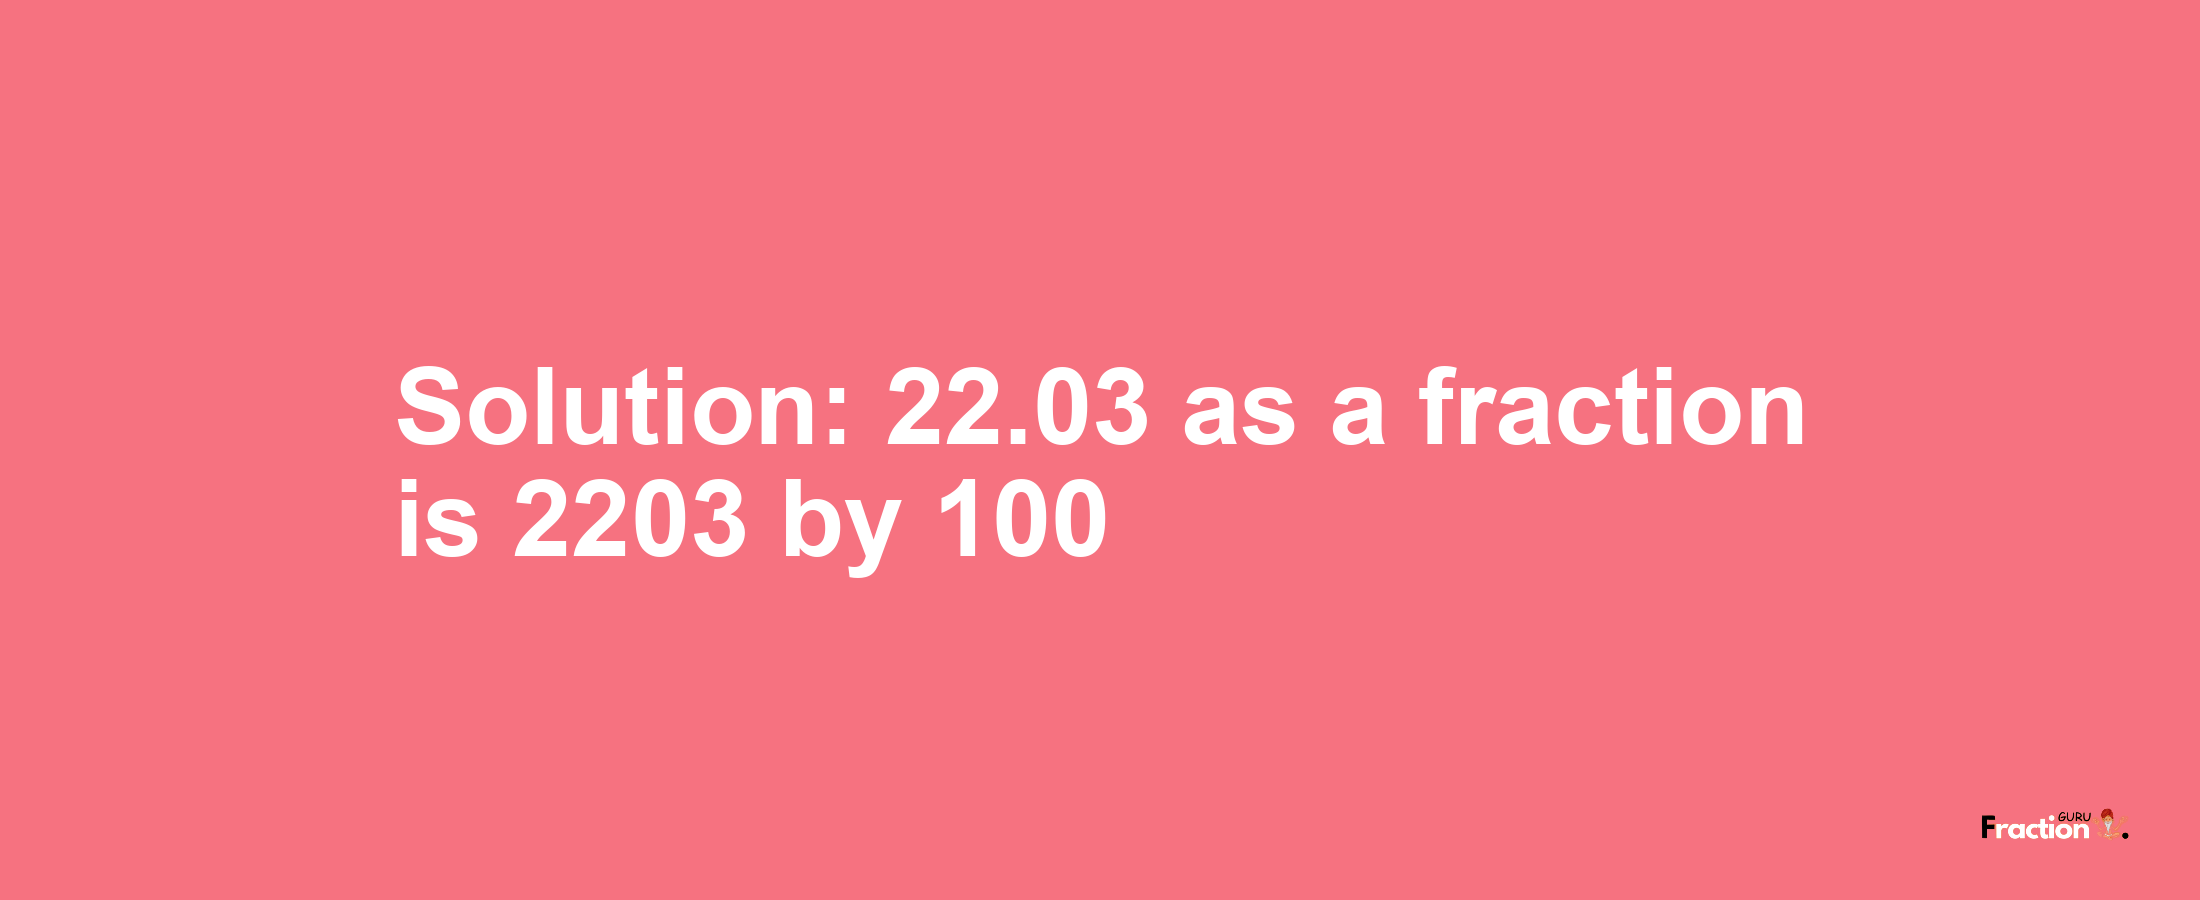 Solution:22.03 as a fraction is 2203/100